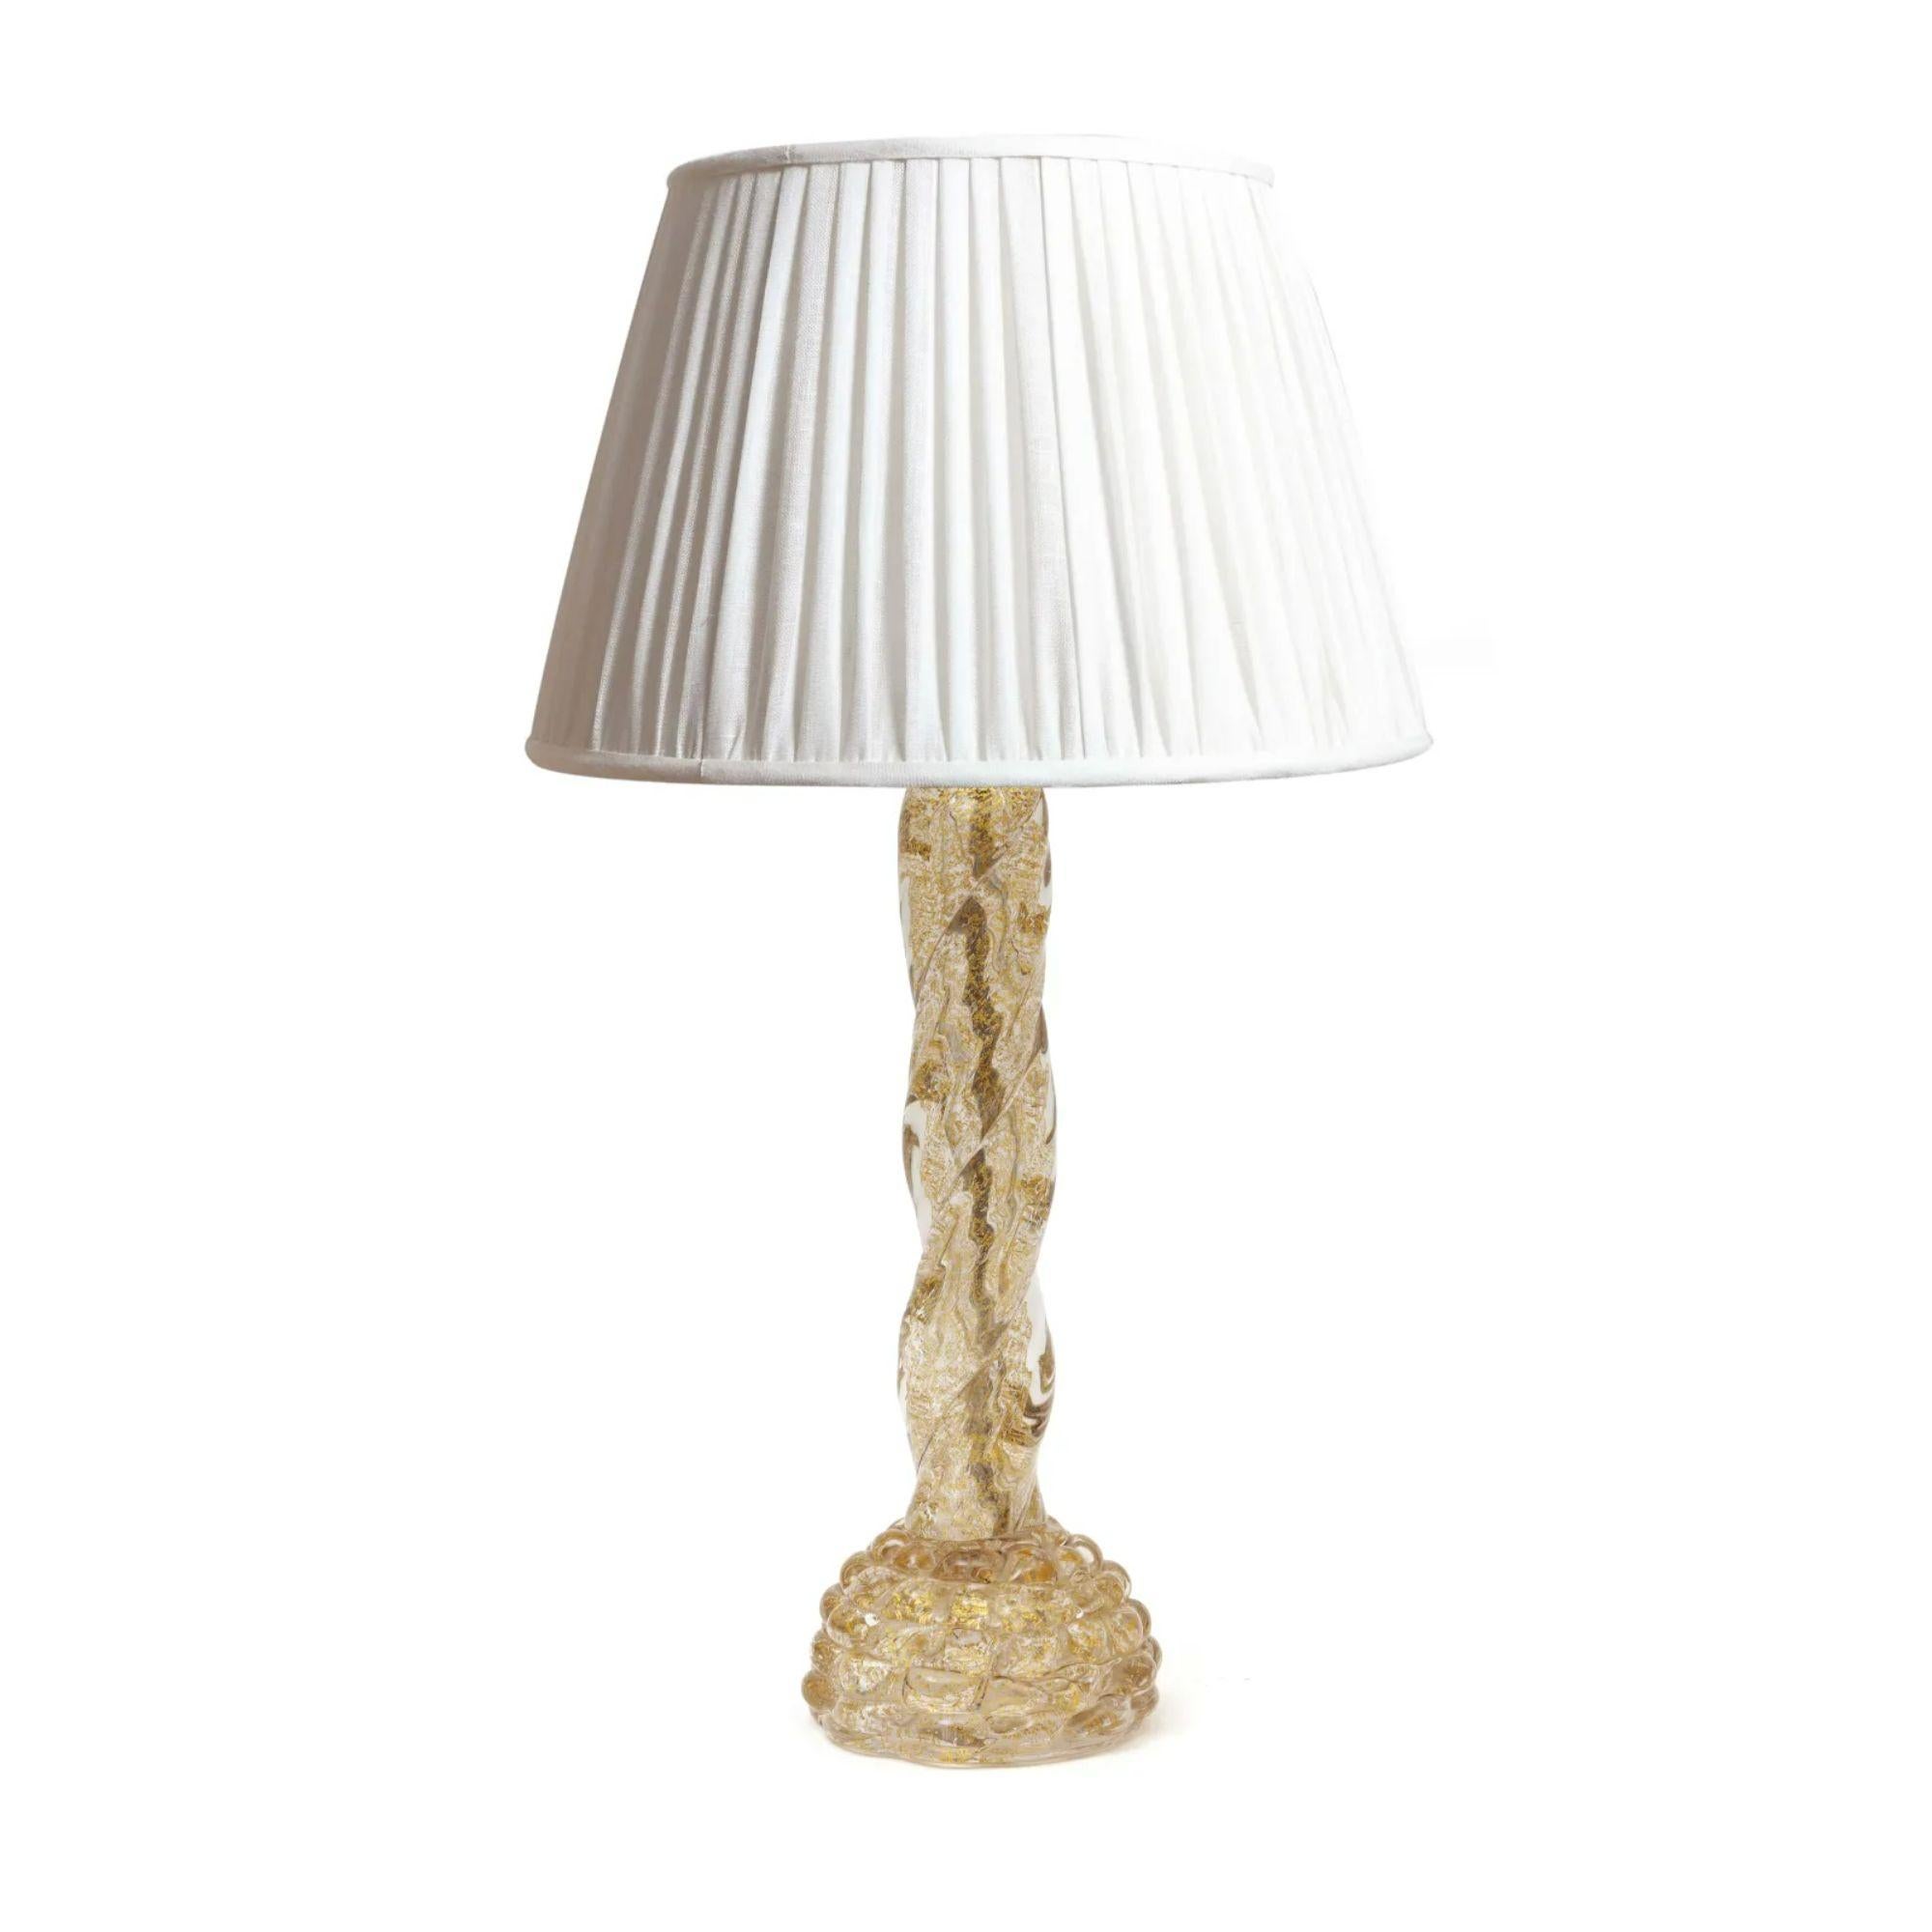 Murano Table Lamp by Ercole Barovier for Barovier E Toso, circa 1940 In Excellent Condition For Sale In London, GB